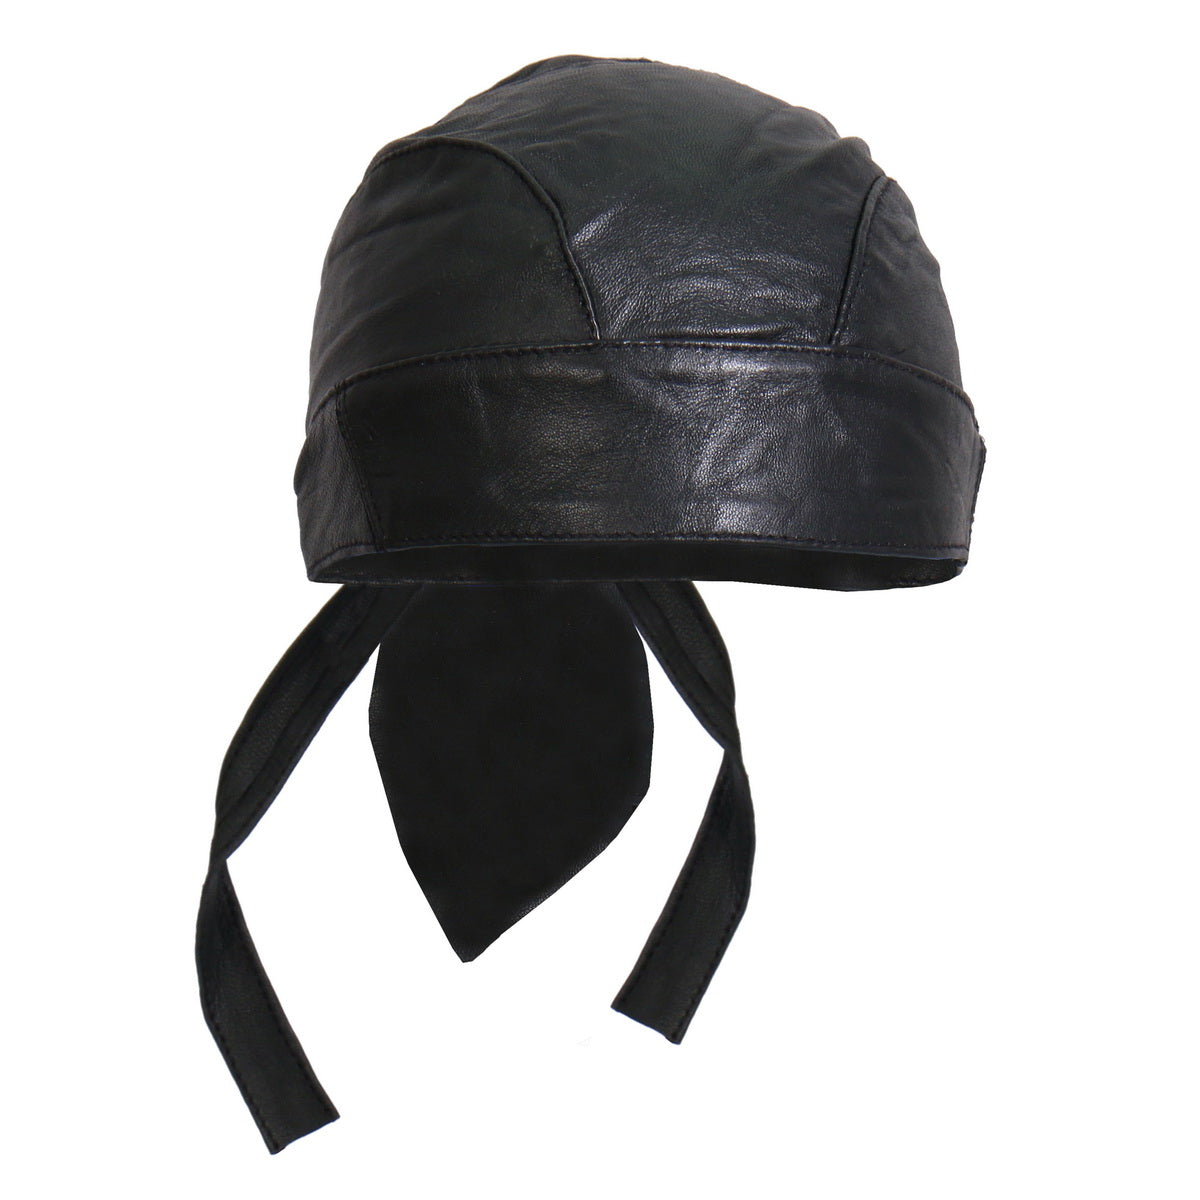 Hot Leathers HWL1002 Medium Weight Leather Headwrap